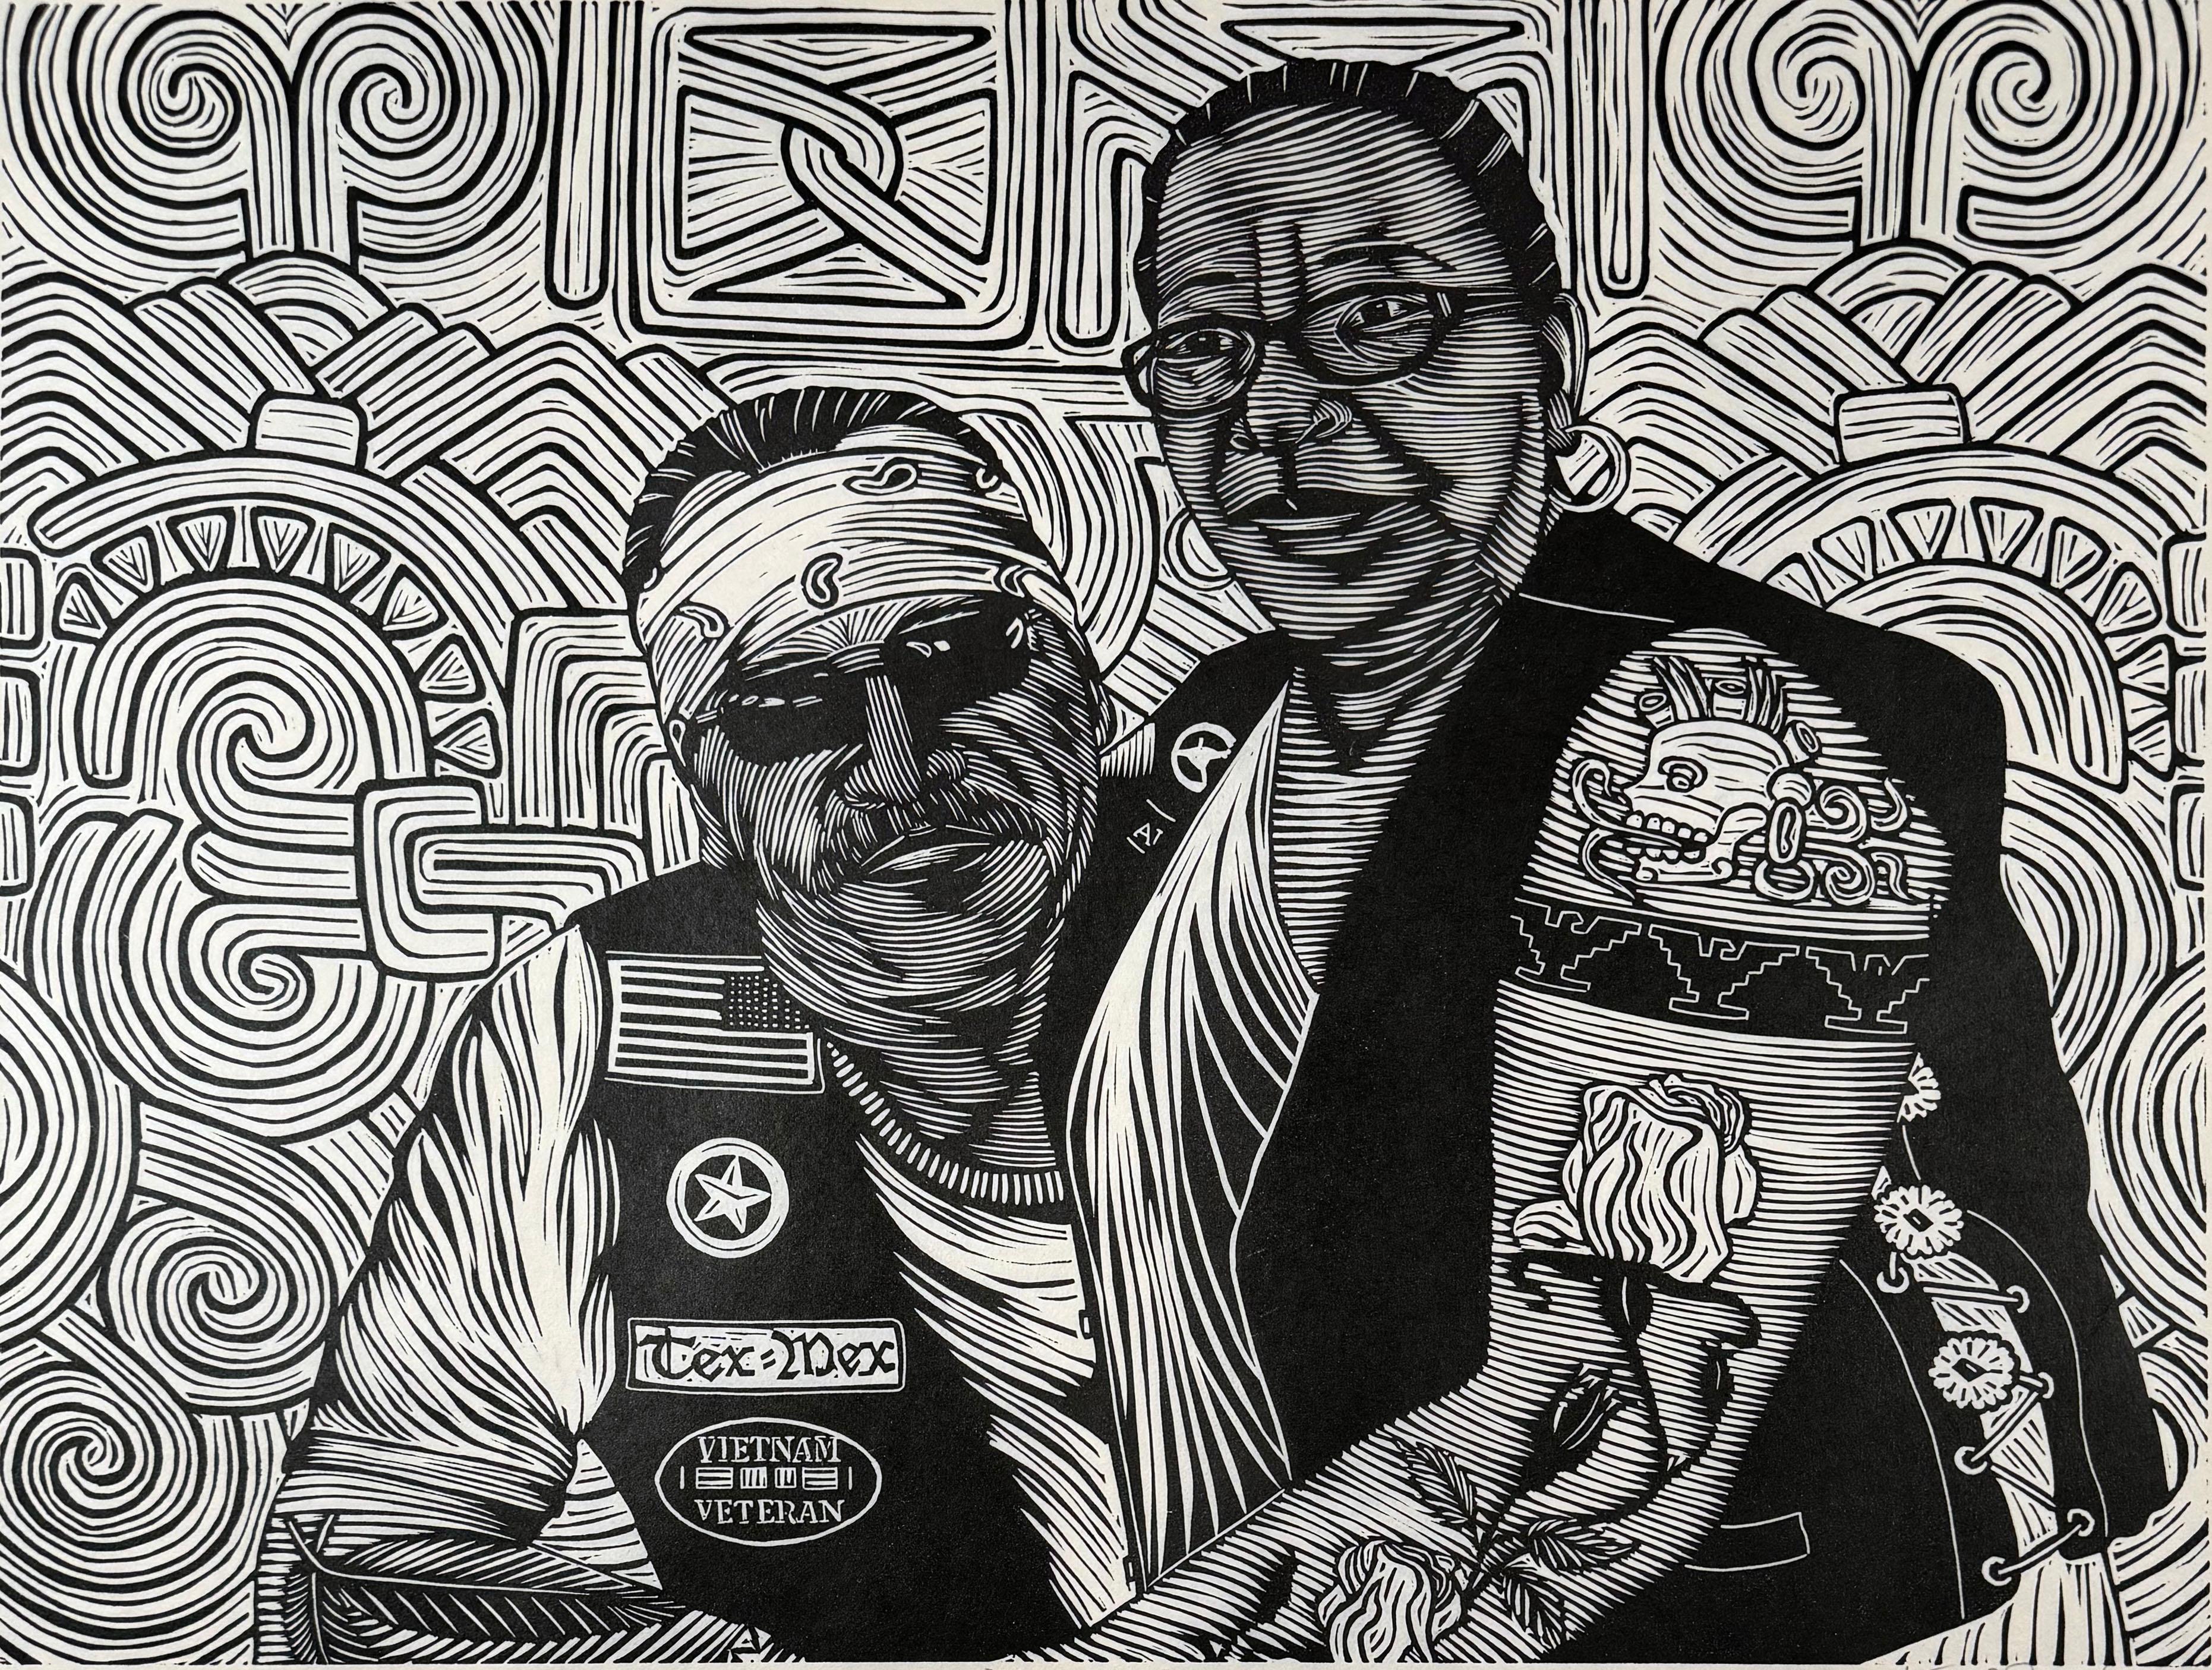 Medium: linocut
Year: 2023
Image Size: 18 x 24 inches
Edition Size: 10

Chicano tattooed couple with emblems of Aztlan and the United States.

As a cultural activist/artist/printmaker, Juan Fuentes has dedicated his career to being part of a global